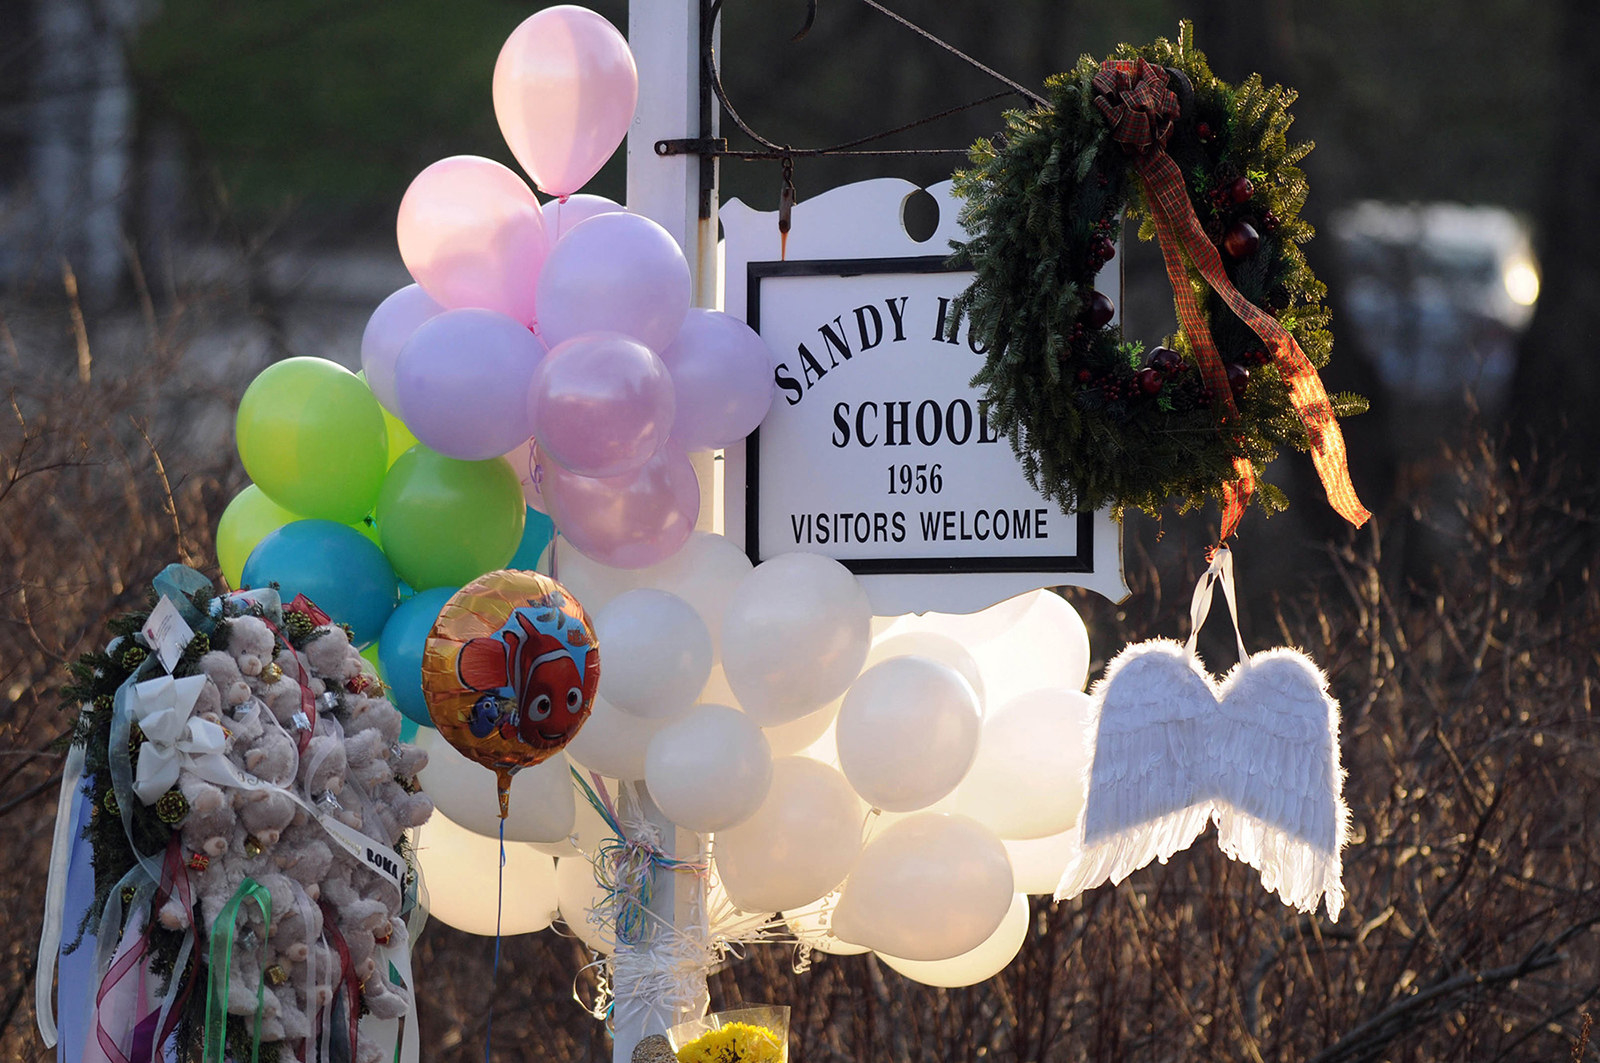 A memorial with flowers and balloons hanging on the Sandy Hook School sign